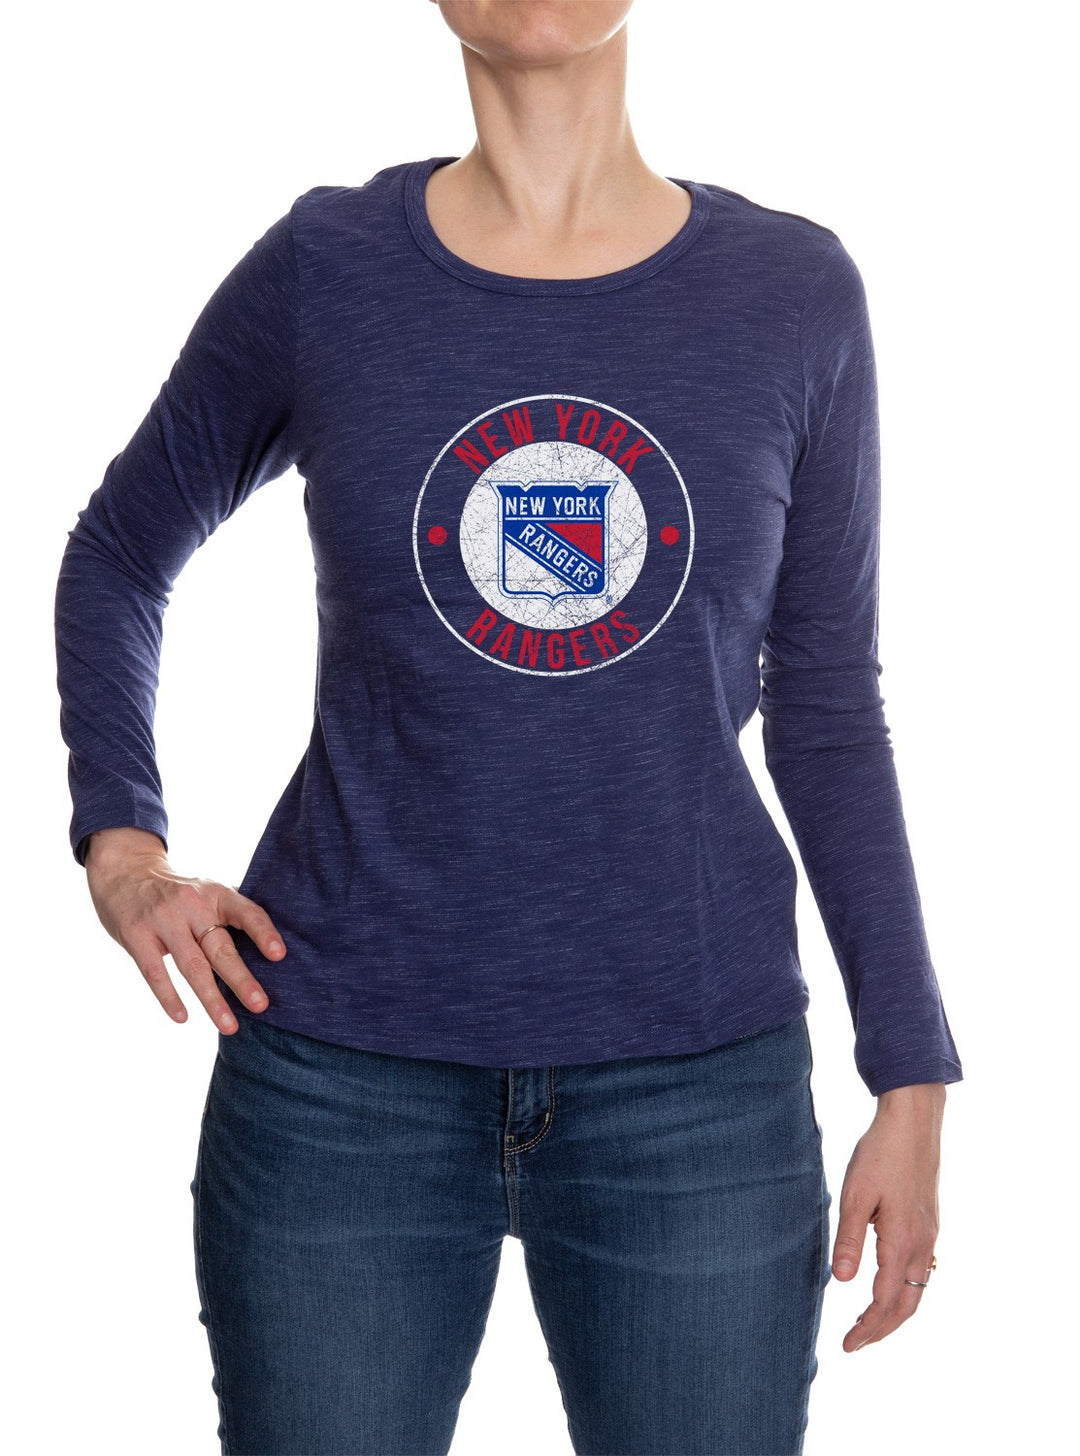 New York Rangers Long Sleeve Shirt for Women in Blue Front View